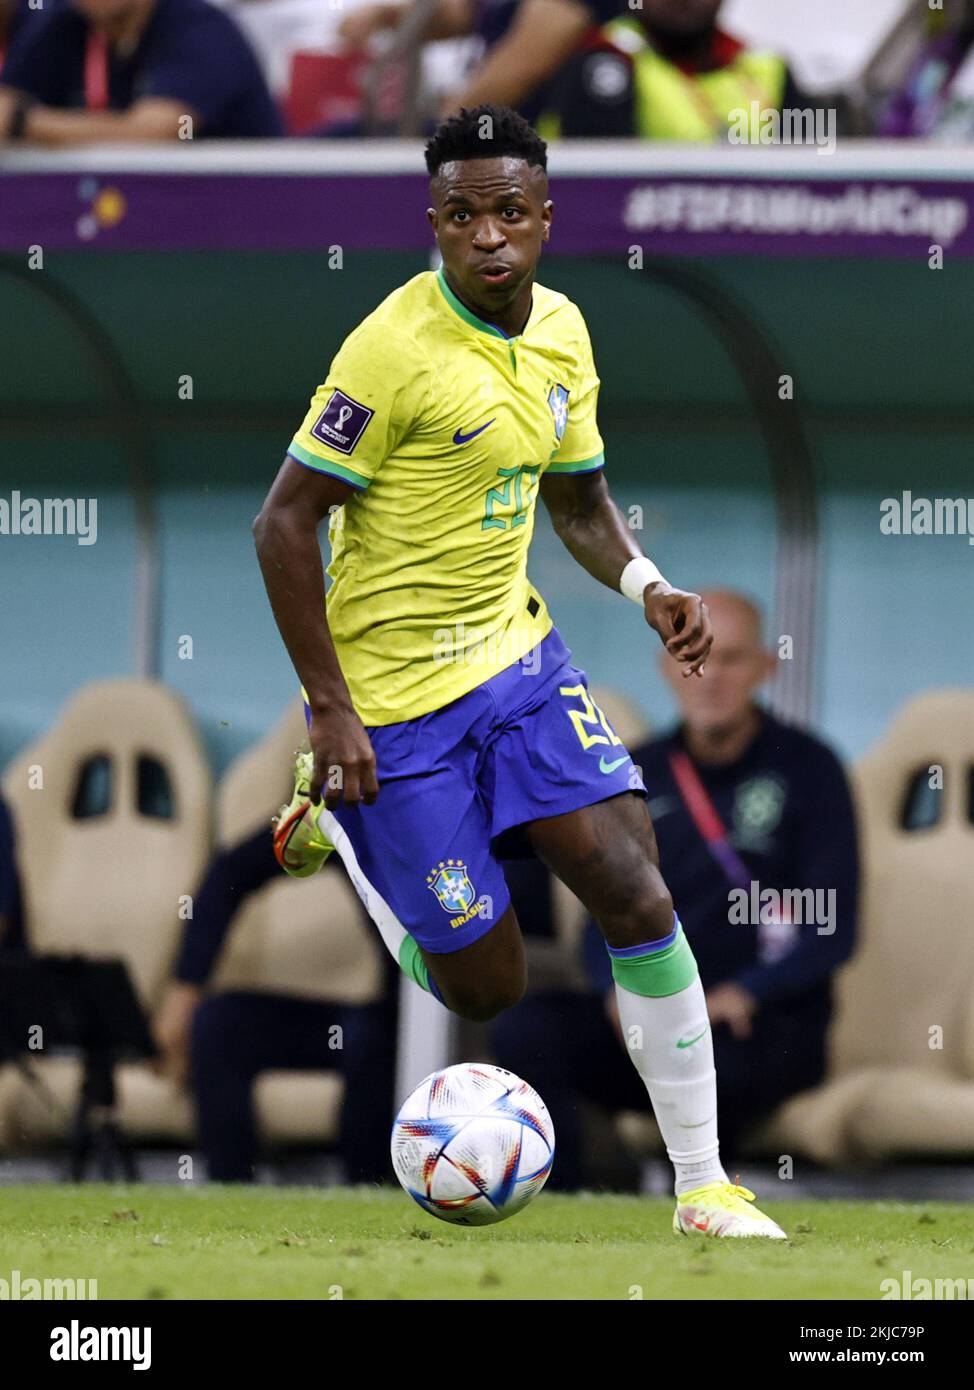 LUSAIL CITY - Vinicius Junior of Brazil during the FIFA World Cup Qatar 2022 group G match between Brazil and Serbia at Lusail Stadium on November 24, 2022 in Lusail City, Qatar. AP | Dutch Height | MAURICE OF STONE Credit: ANP/Alamy Live News Stock Photo